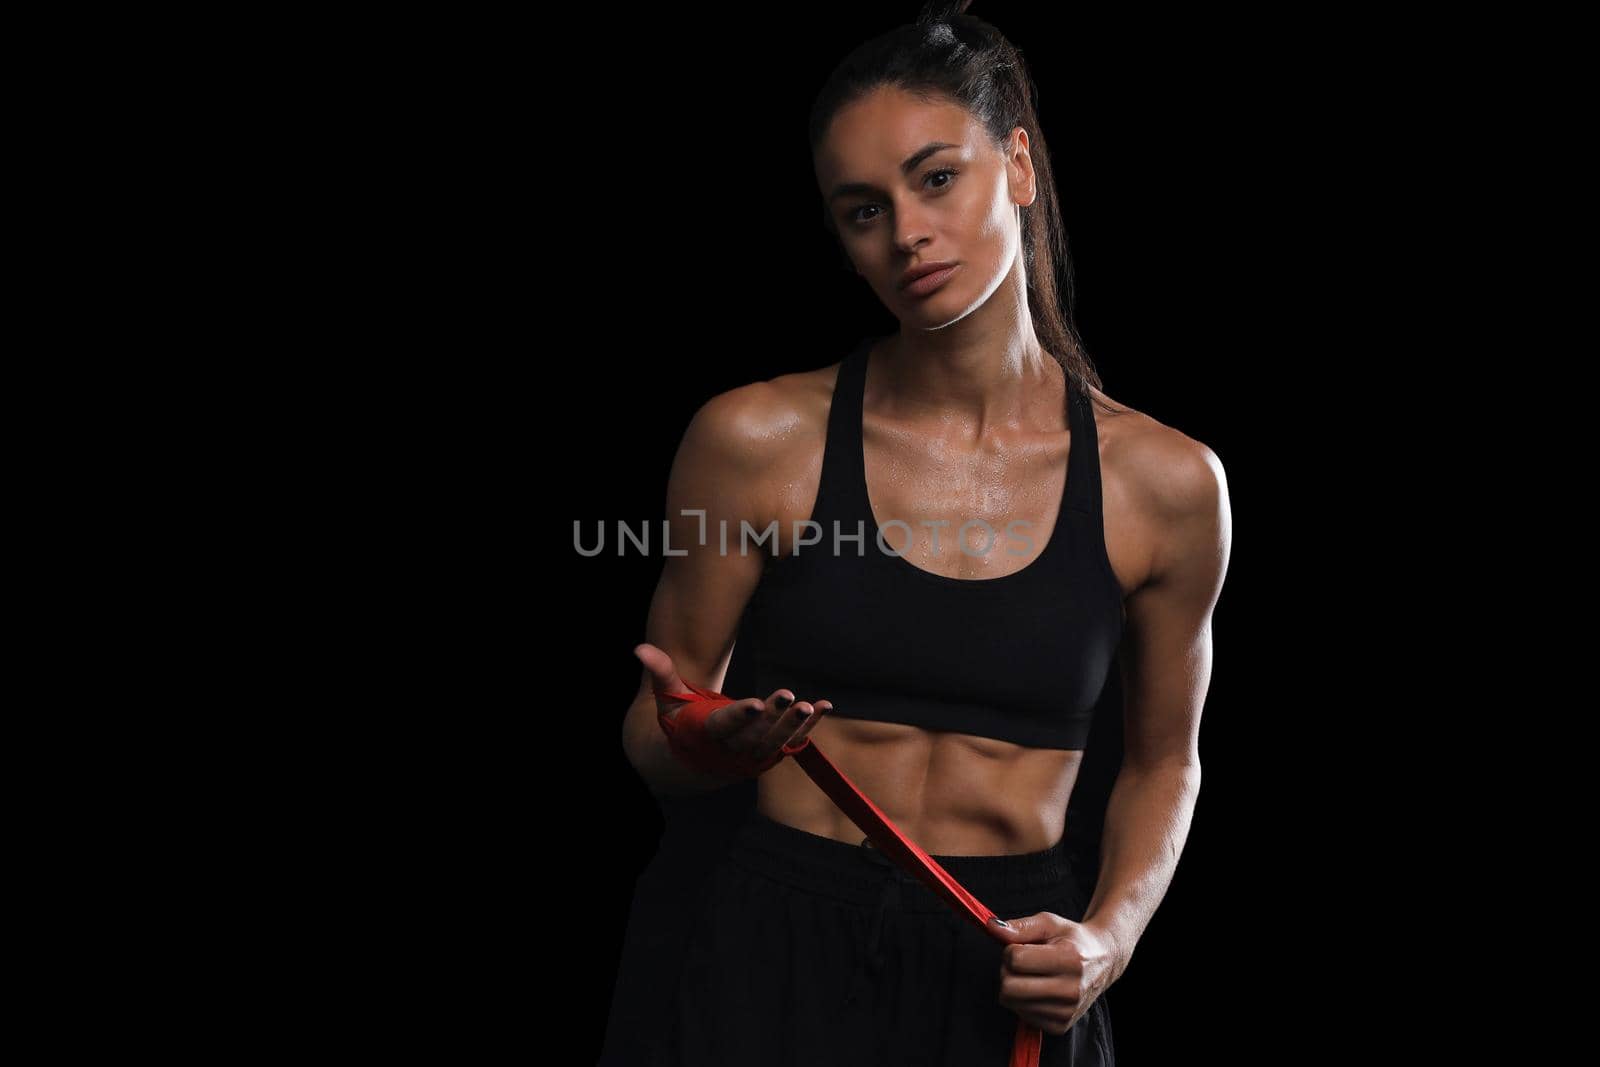 Beautiful and fit female fighter getting prepared for the fight or training, wrapping her hands with bandage tape against dark background